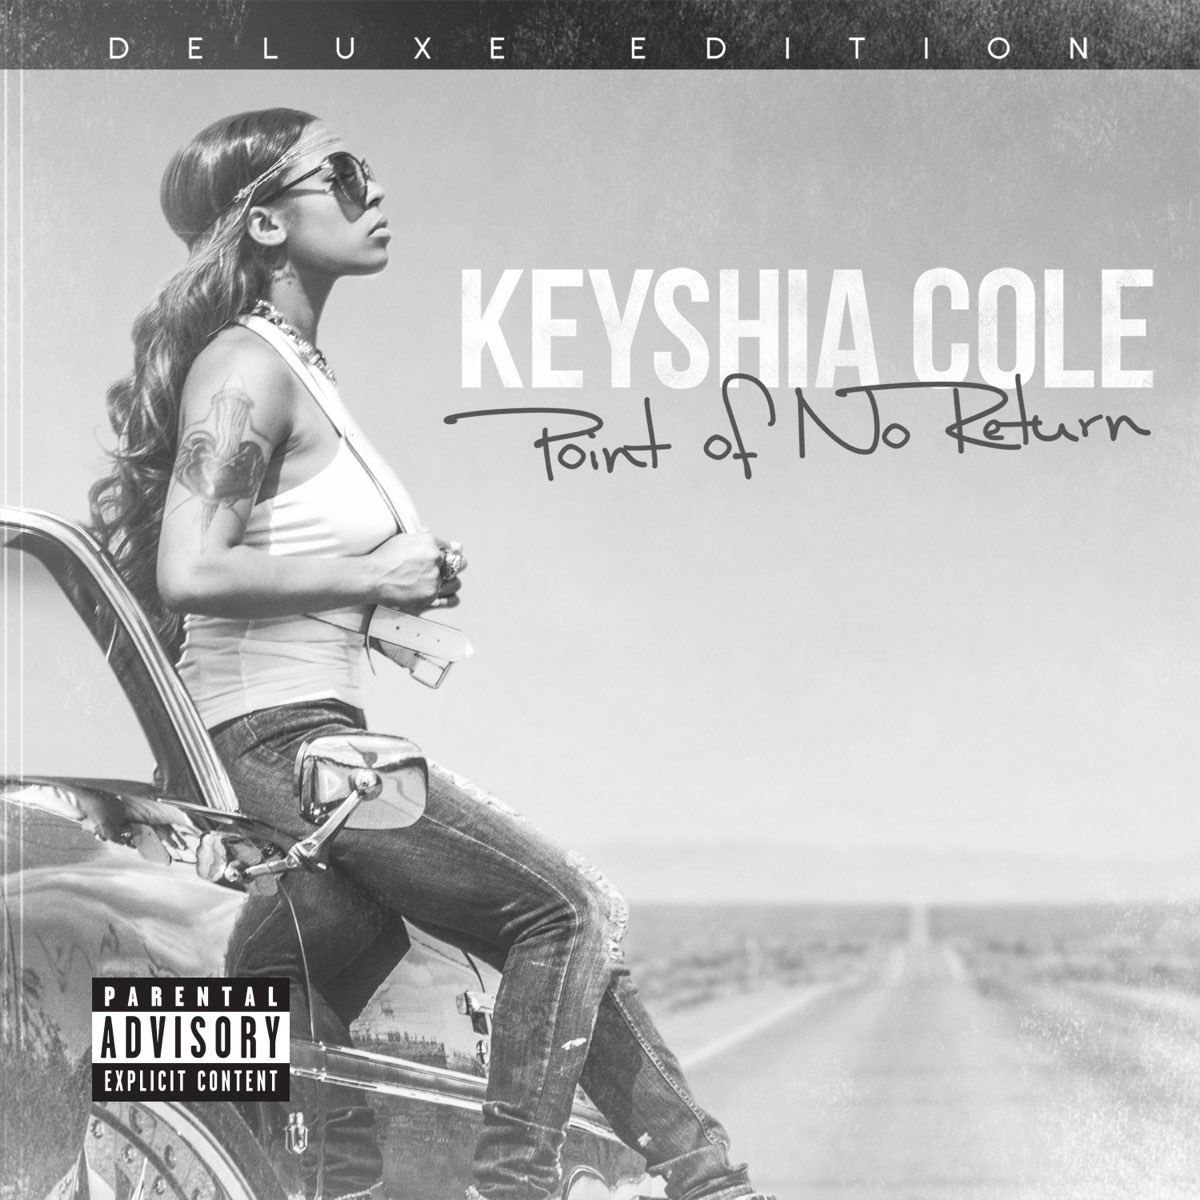 ‎Point of No Return (Deluxe Edition) - Album by Keyshia Cole - Apple Music